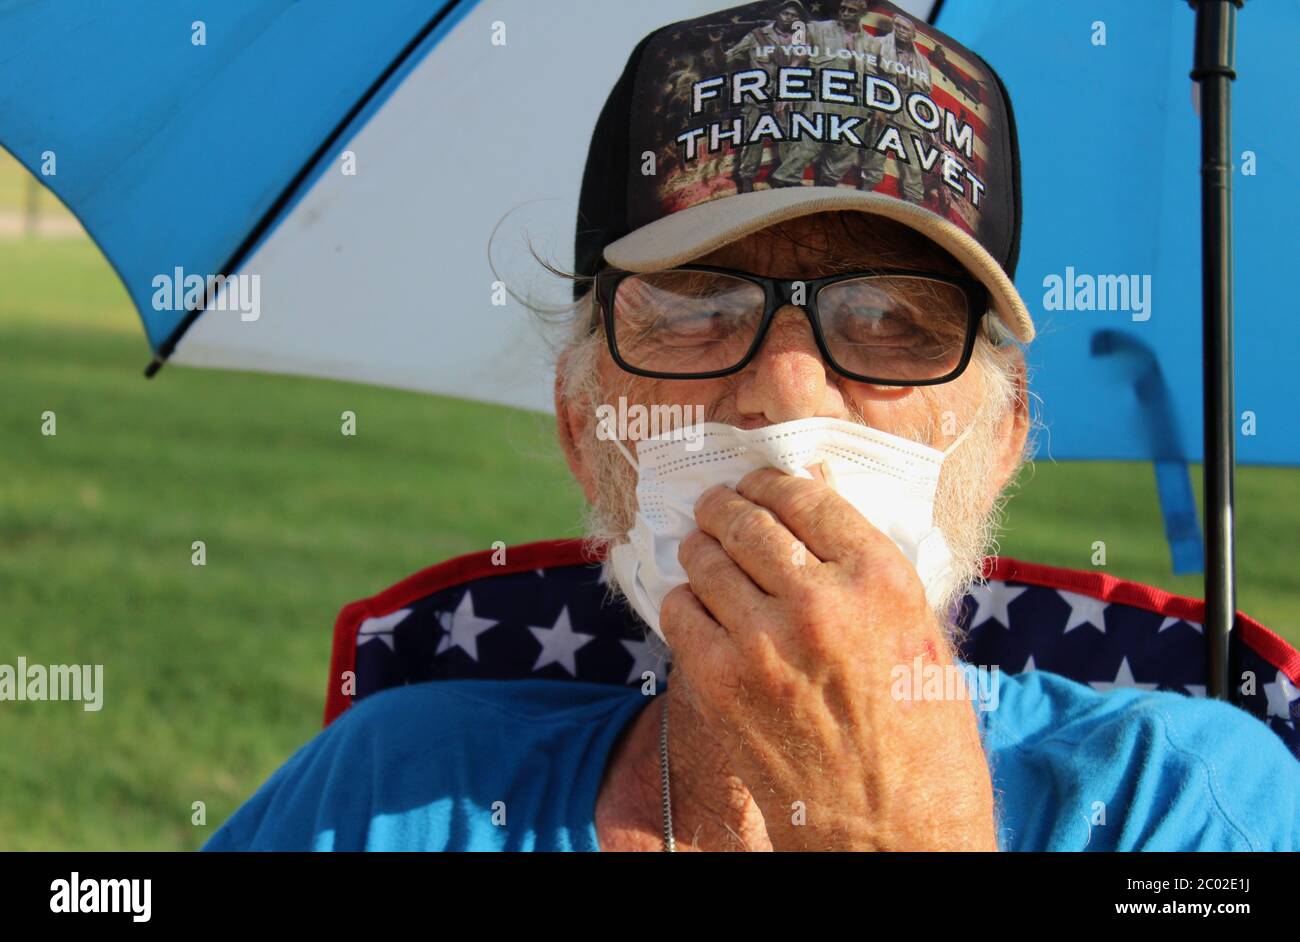 June 10, 2020, Washington D.C, District of Columbia, U.S: John Marr, a homeless Vietnam War vet, has been sitting across the street from the White House, since the first day of protests when men in unidentifiable military-type uniforms attacked innocent protestors, He says he is keeping an eye on President Trump, whom invited him into the White House, but he said, 'Hell no, you come out here if you want to talk to me!' .Hundreds continue to gather throughout the day and night on the newly named Black Lives Matter Street, in front of a heavy fenced White House, in the wake of the George Floy Stock Photo